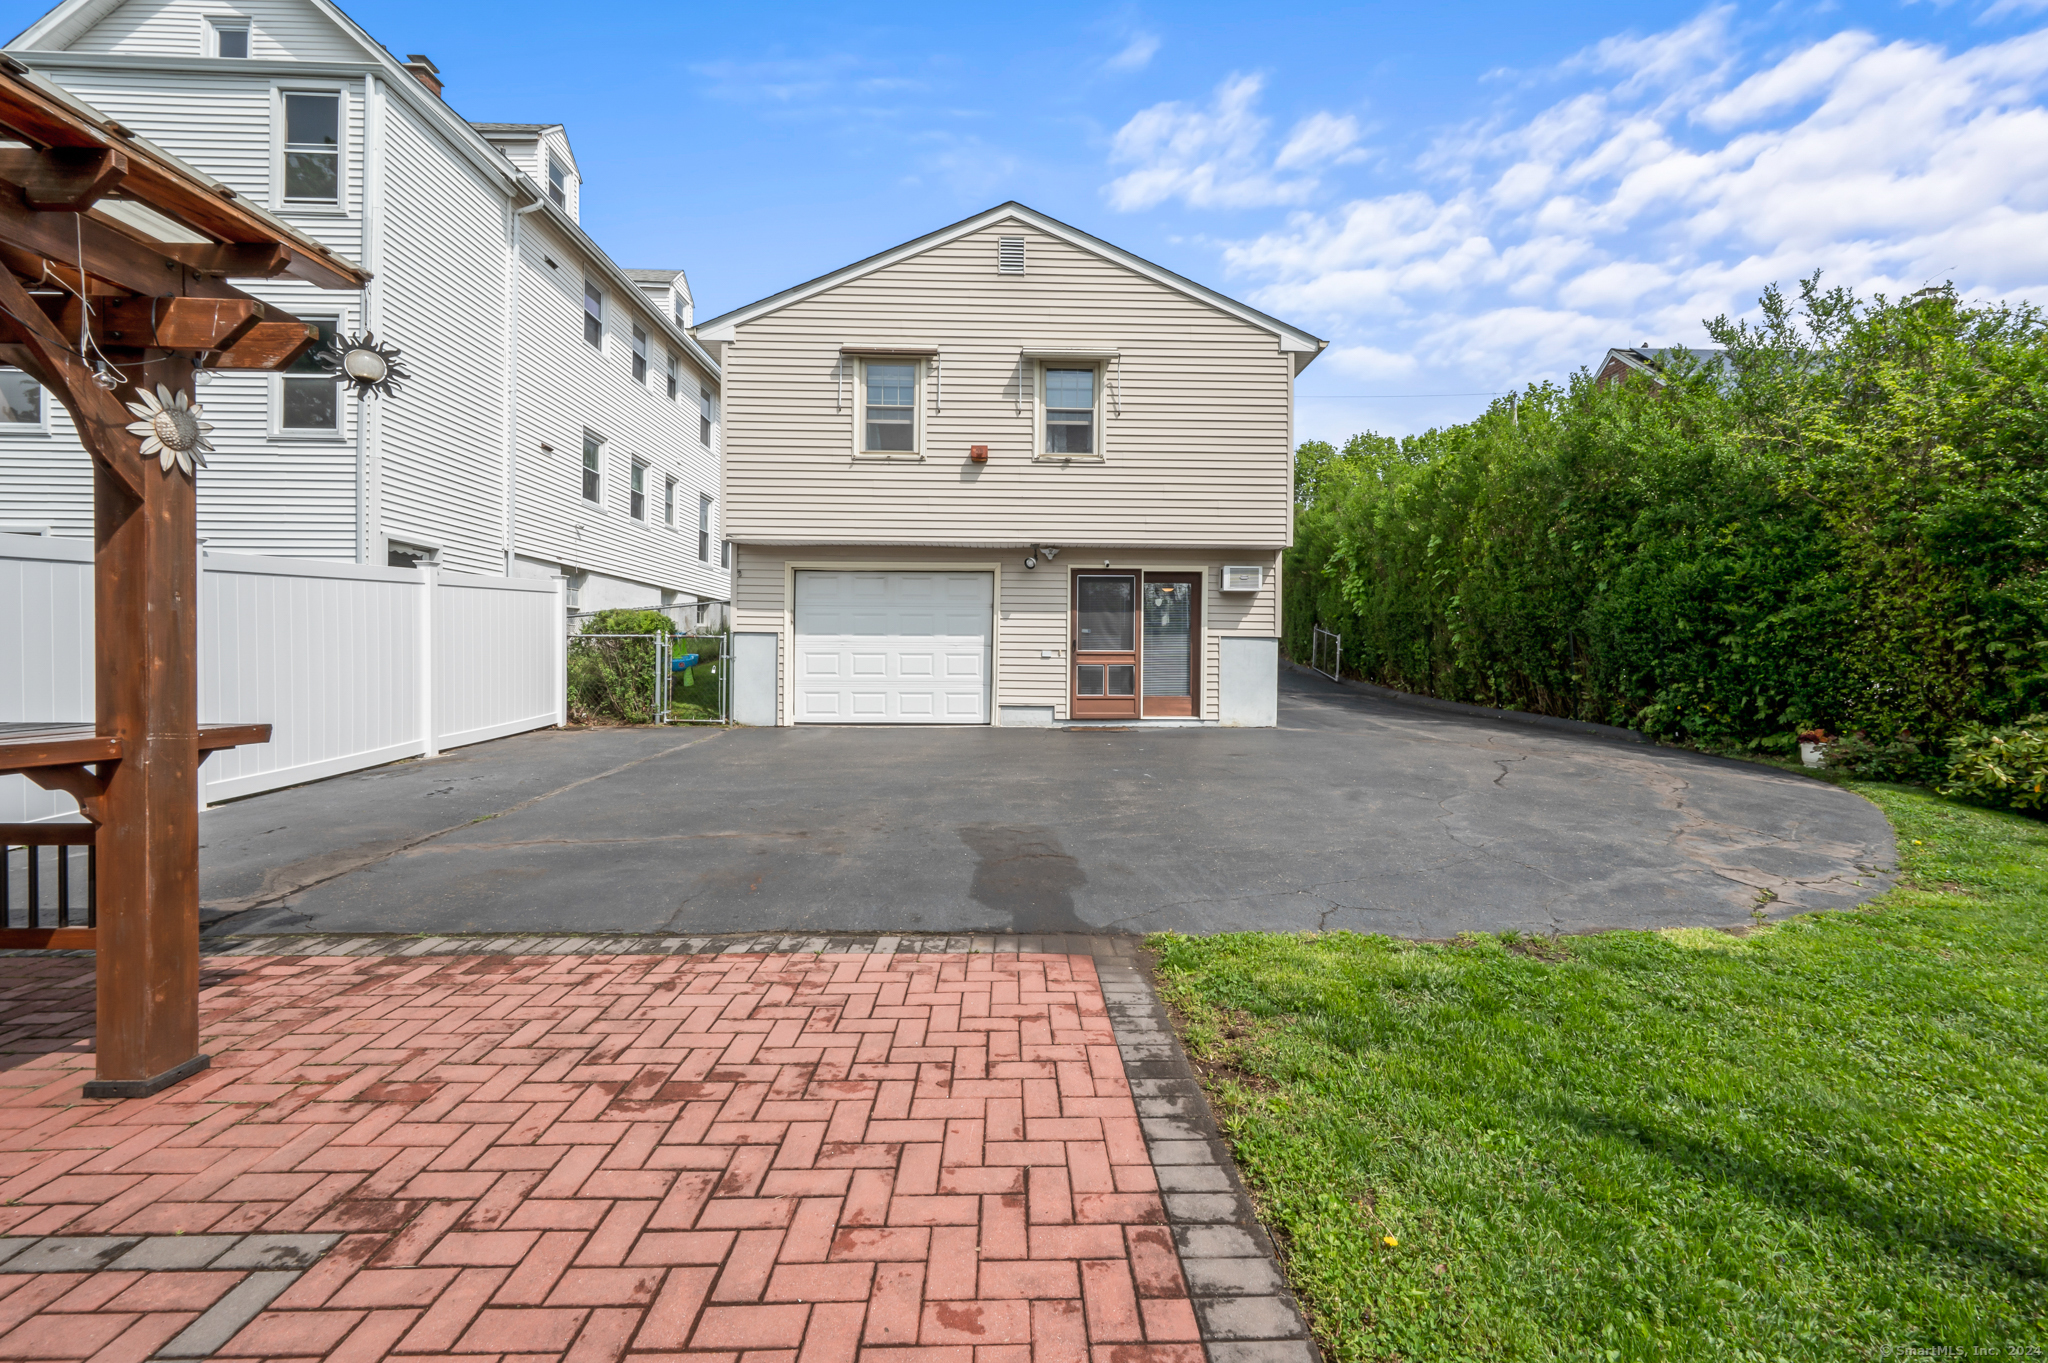 36 Queen, New Britain, CT 06053 Listing Photo  26